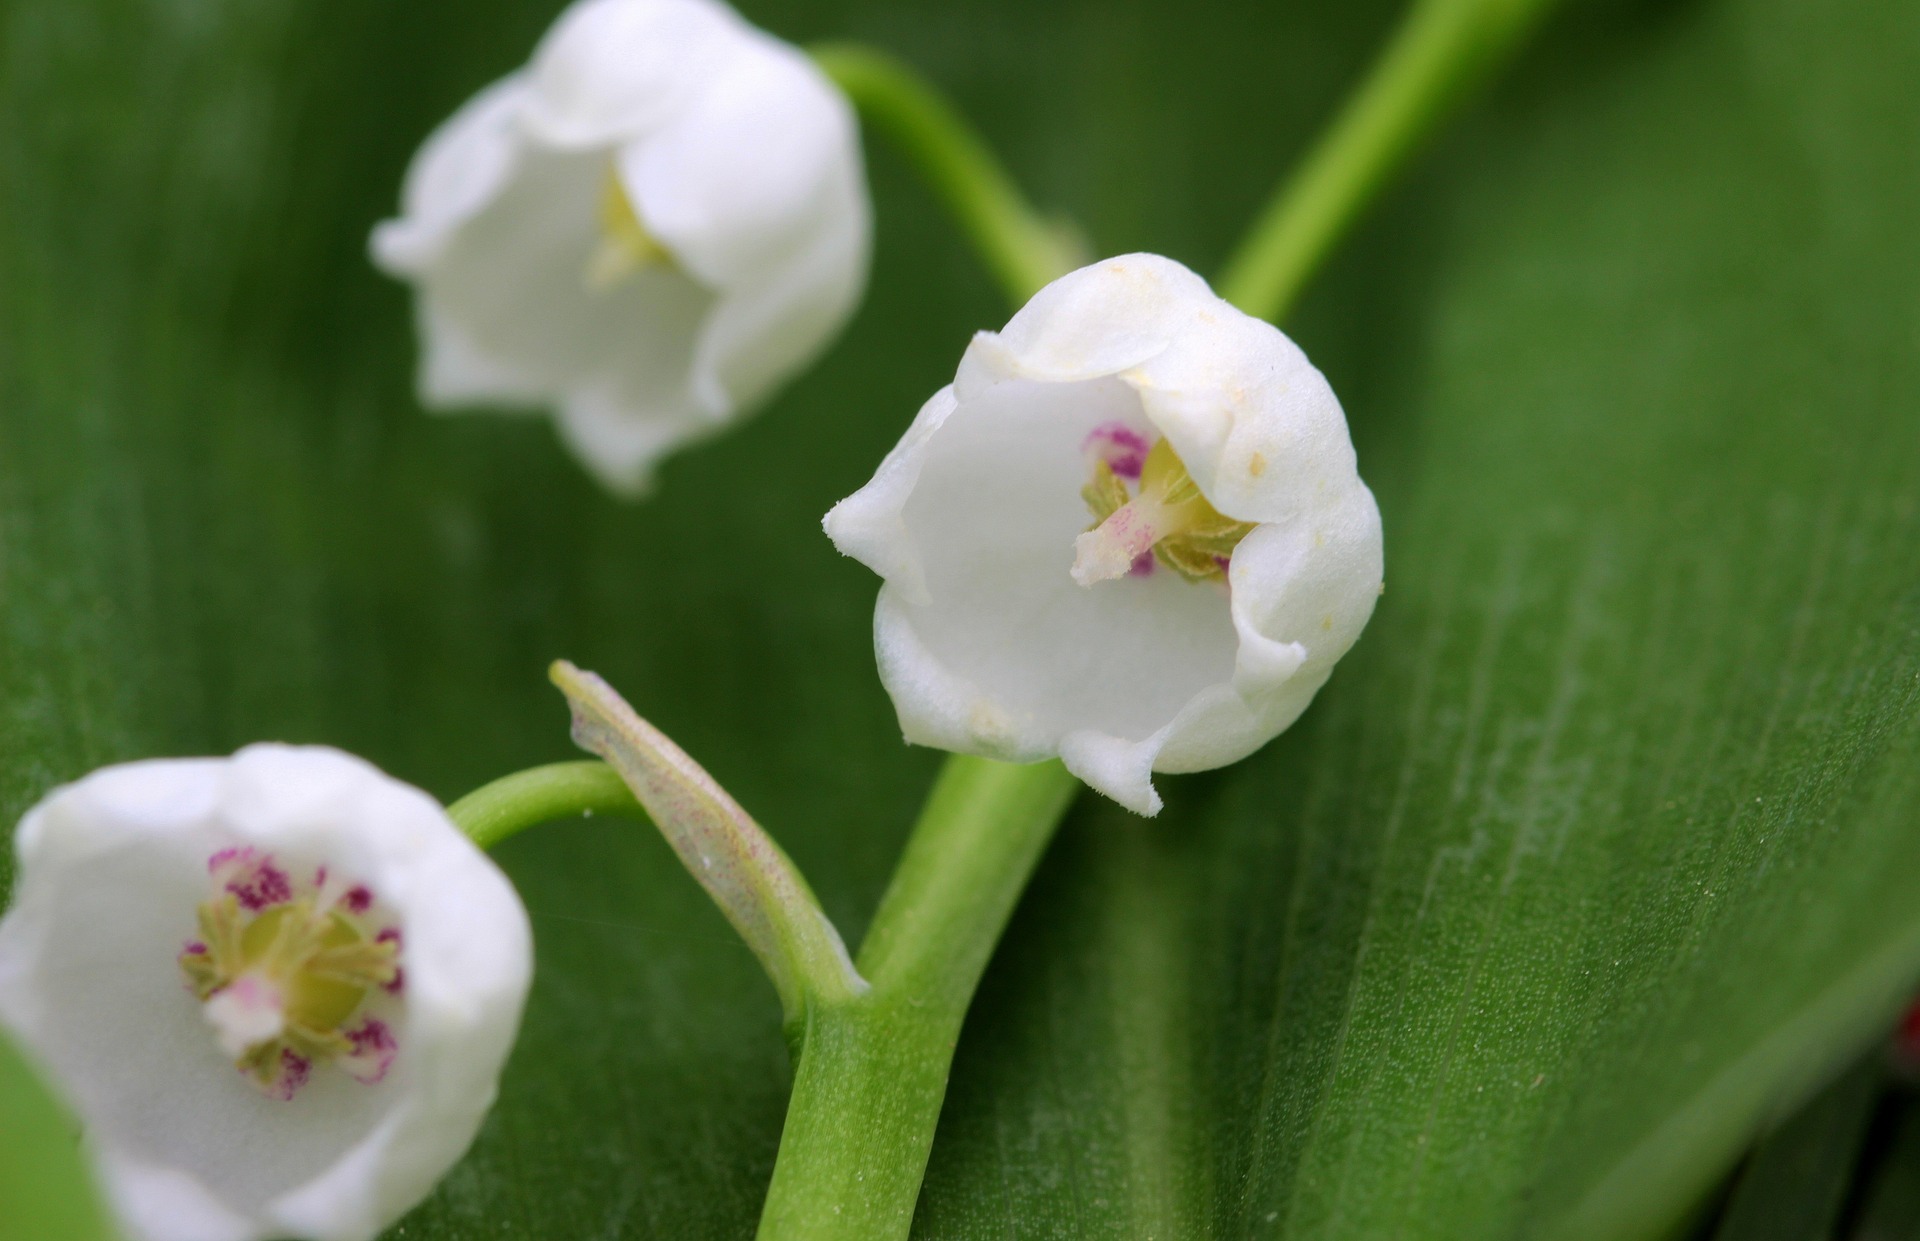 https://www.naturescape.co.uk/wp-content/uploads/2021/03/lily-of-the-valley-gba581463e_1920.jpg